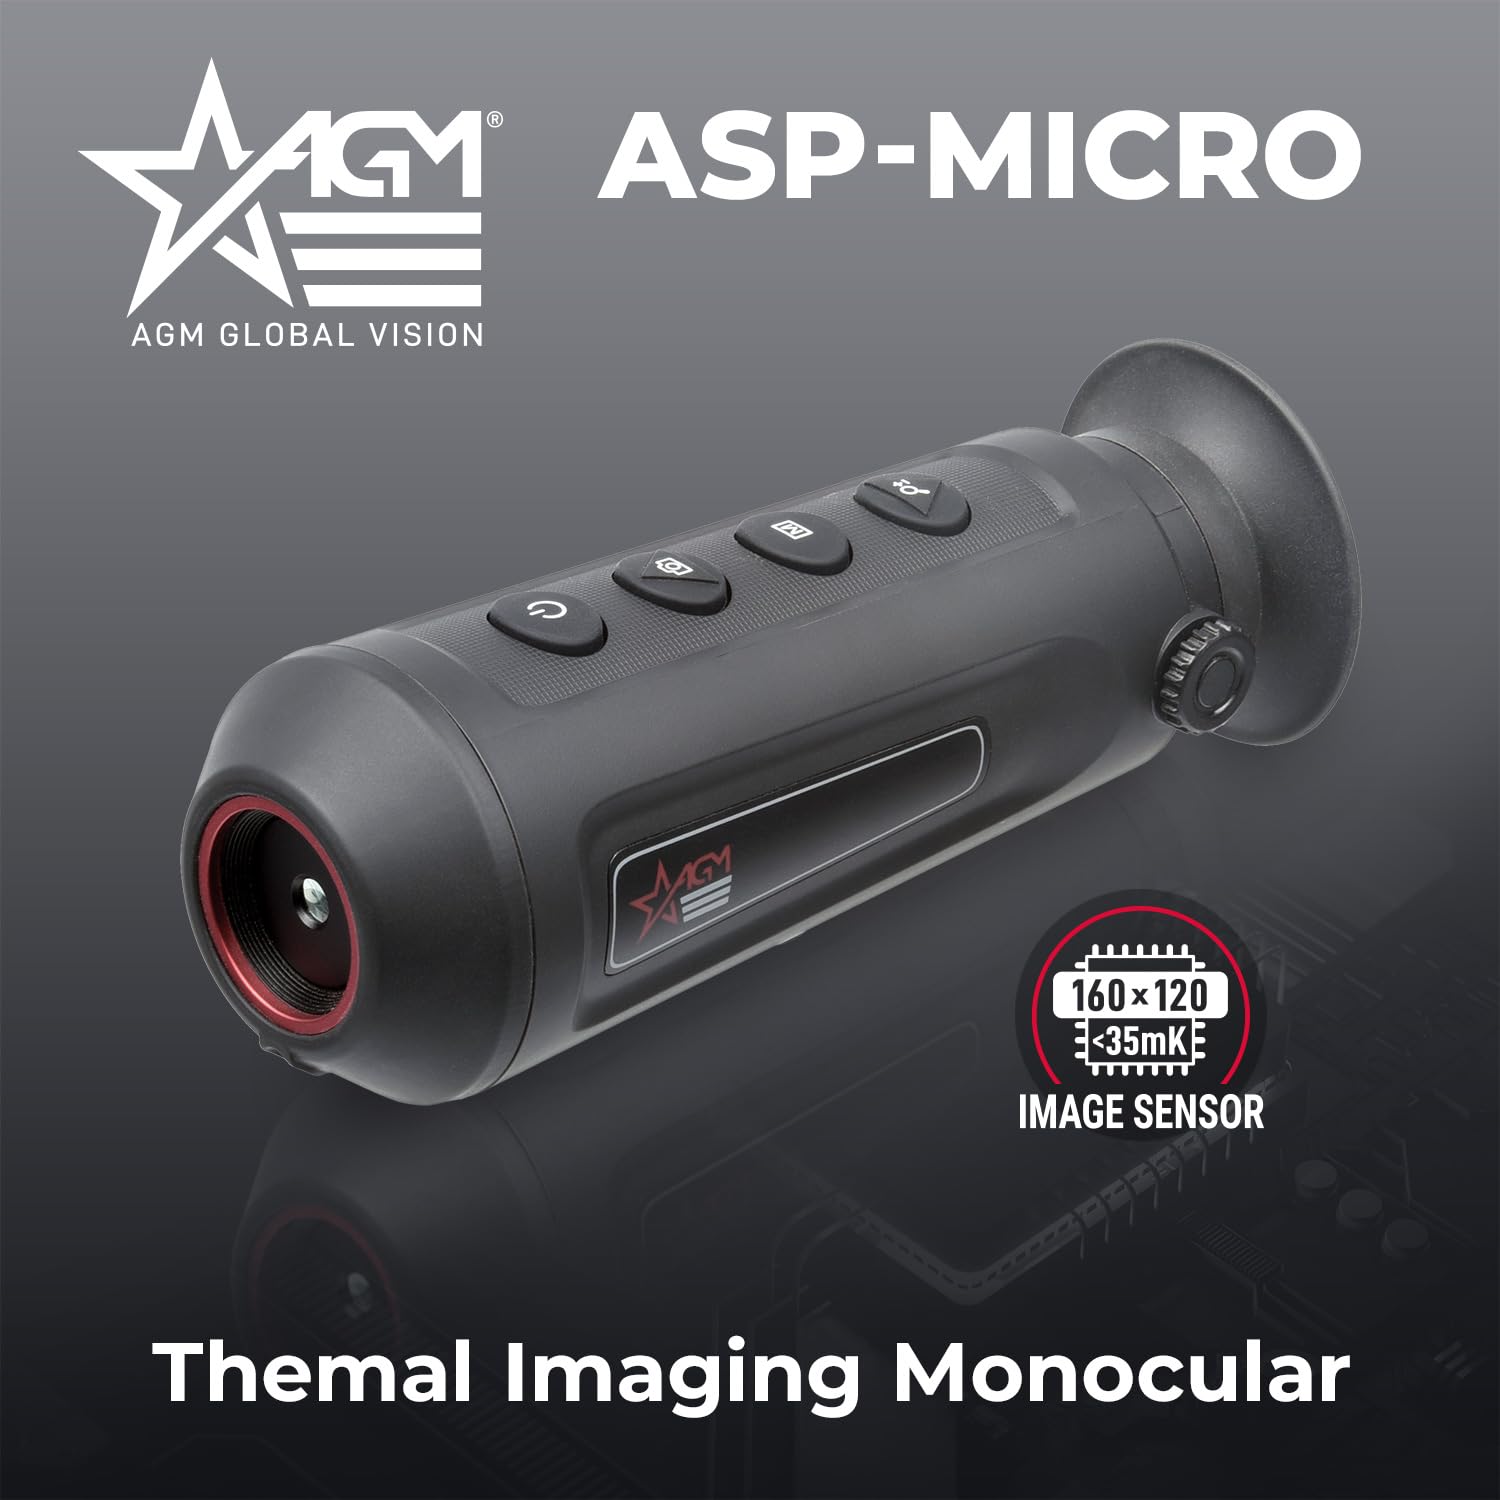 AGM Global Vision Asp-Micro TM160 Short Range Thermal Imaging Monocular with Heat Vision for Hunting, High-Sensitivity Infrared monocular with Distance Measurement and Wi-Fi Hotspot 6.3 × 2.4 × 2.2